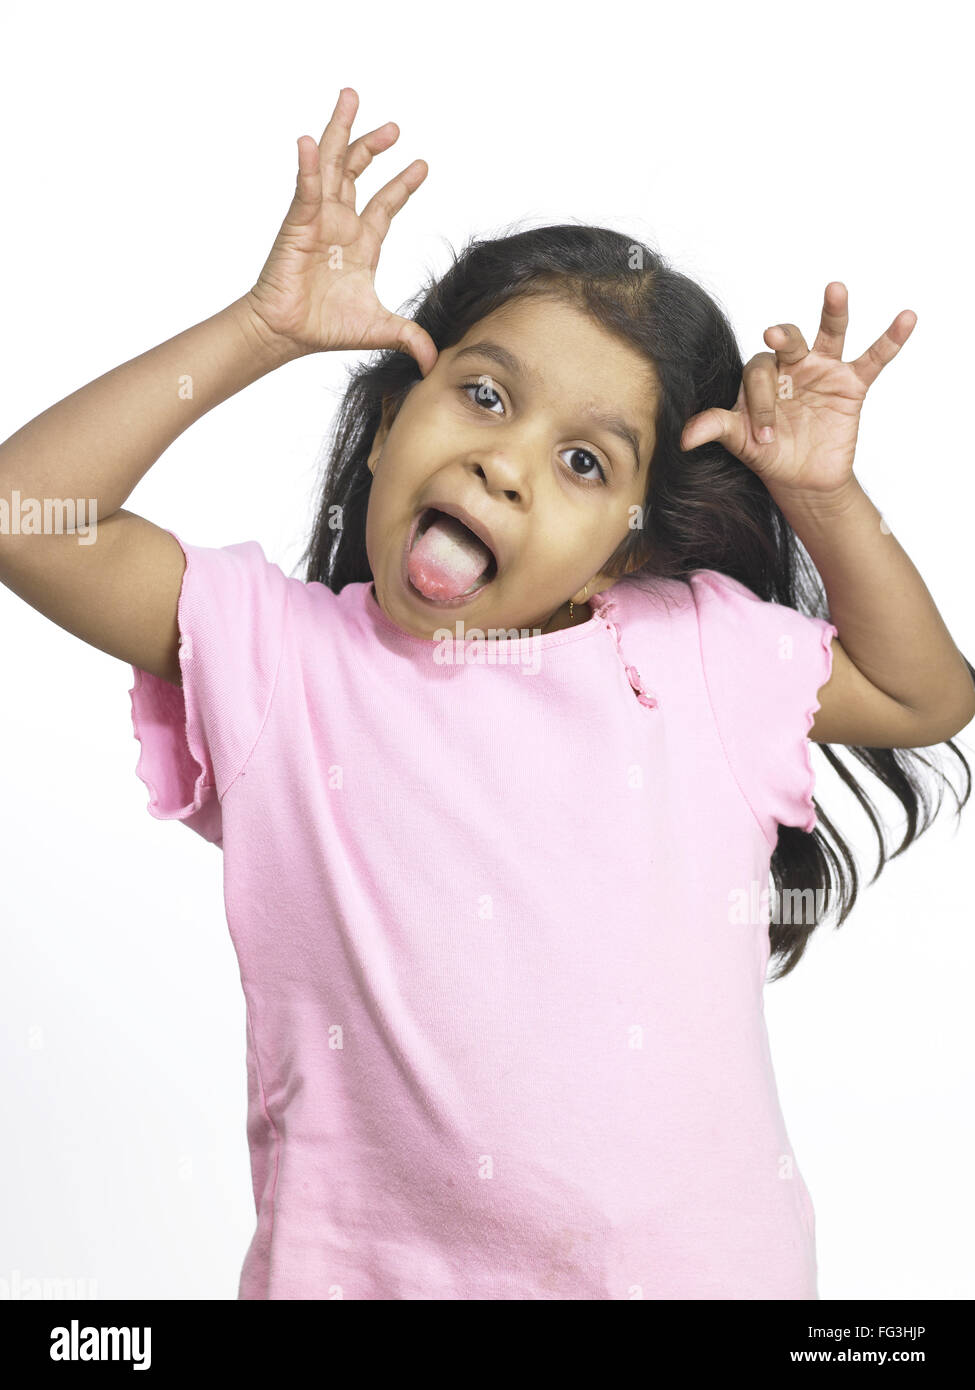 South Asian Indian girl making funny face in nursery school MR Stock Photo  - Alamy